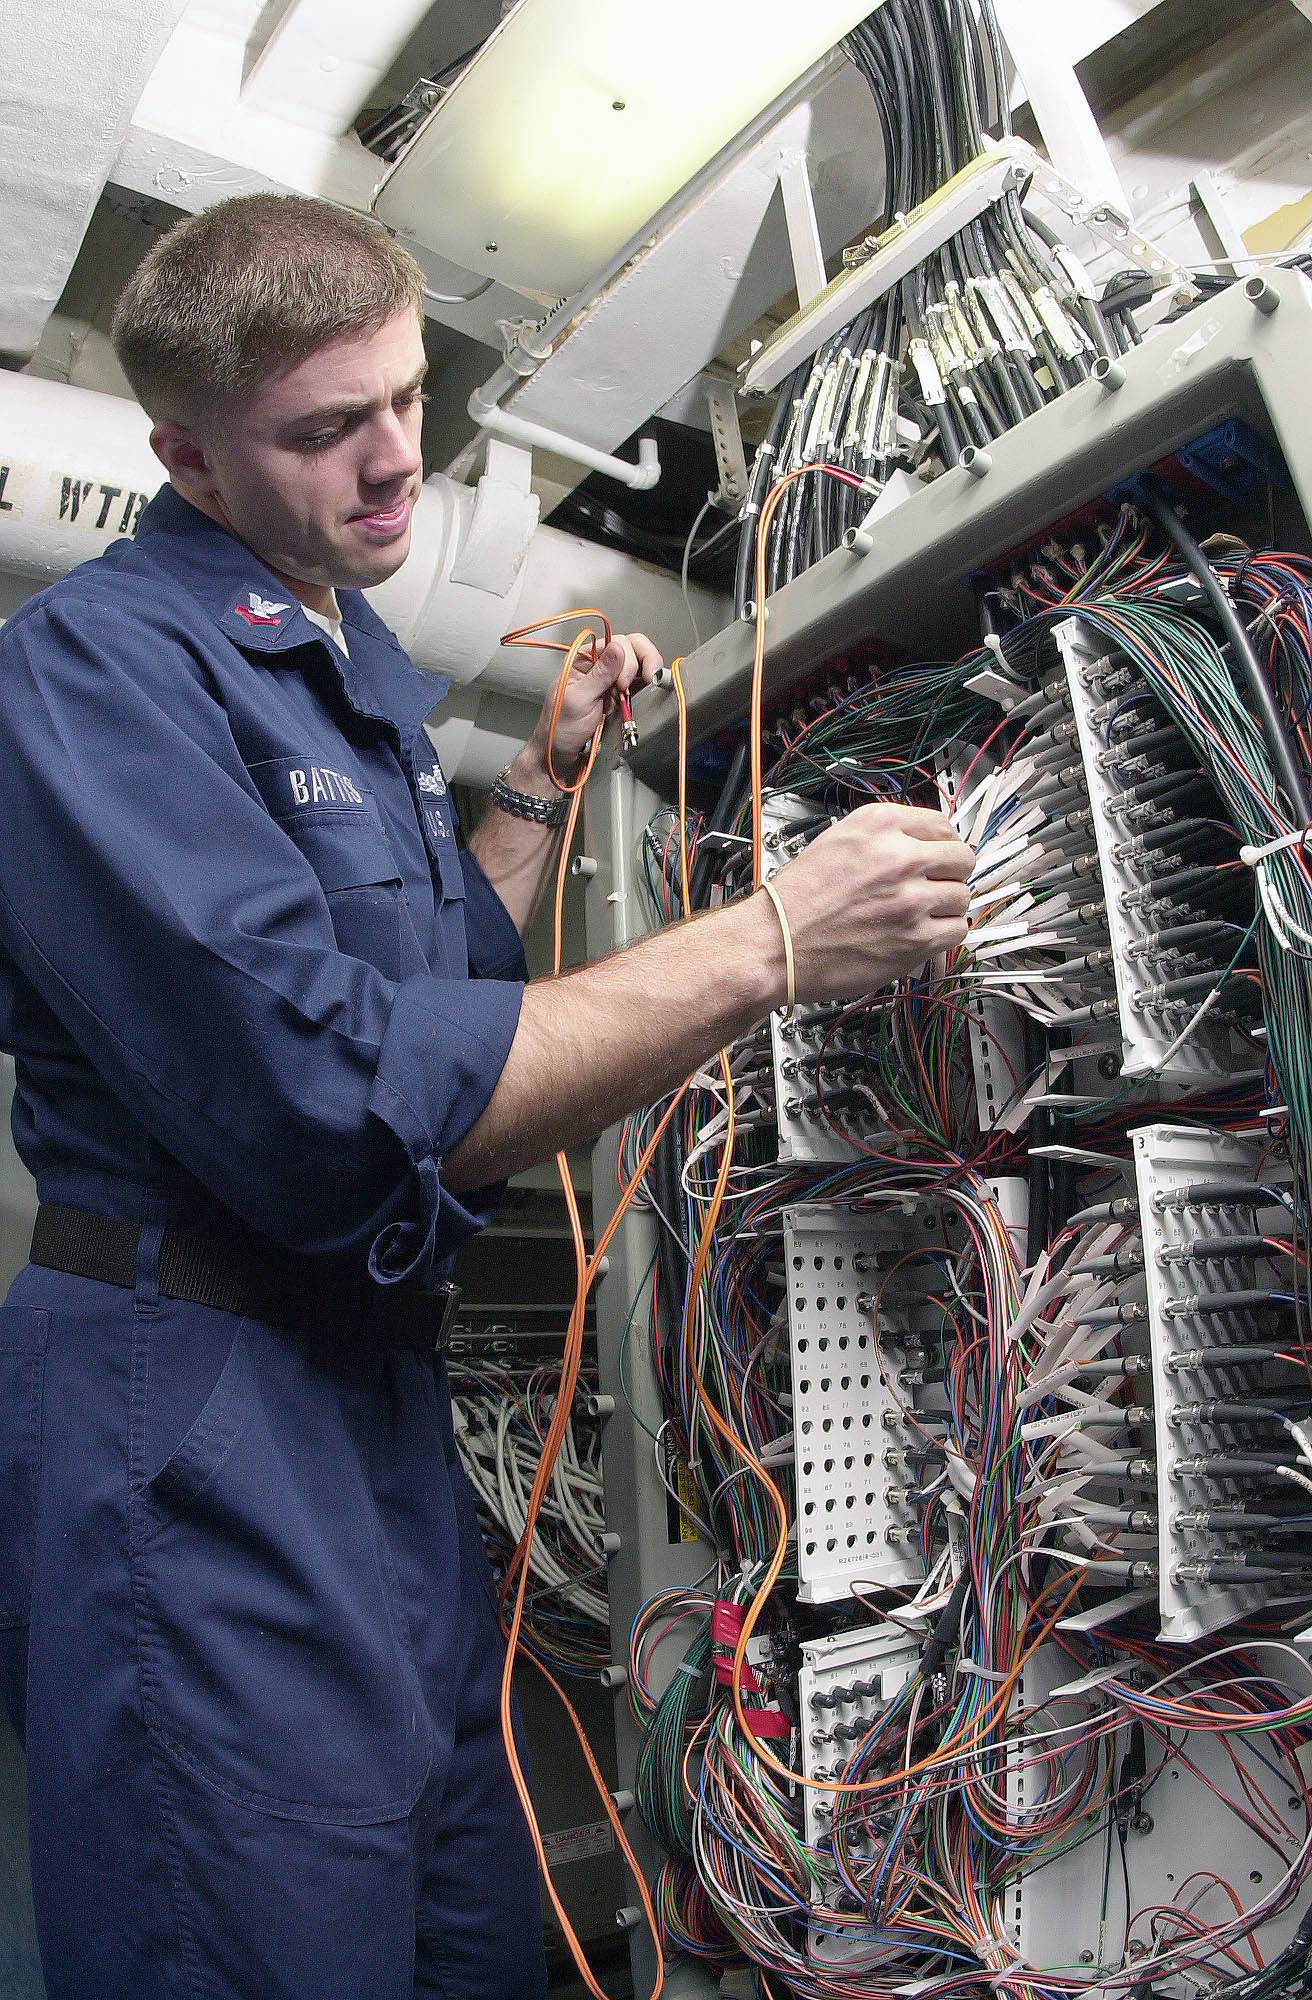 US Navy 030502-N-0413R-002 Information Technician 2nd Class George Battistell repairs Local Area Network (LAN) connections aboard the aircraft carrier USS Nimitz (CVN 68)